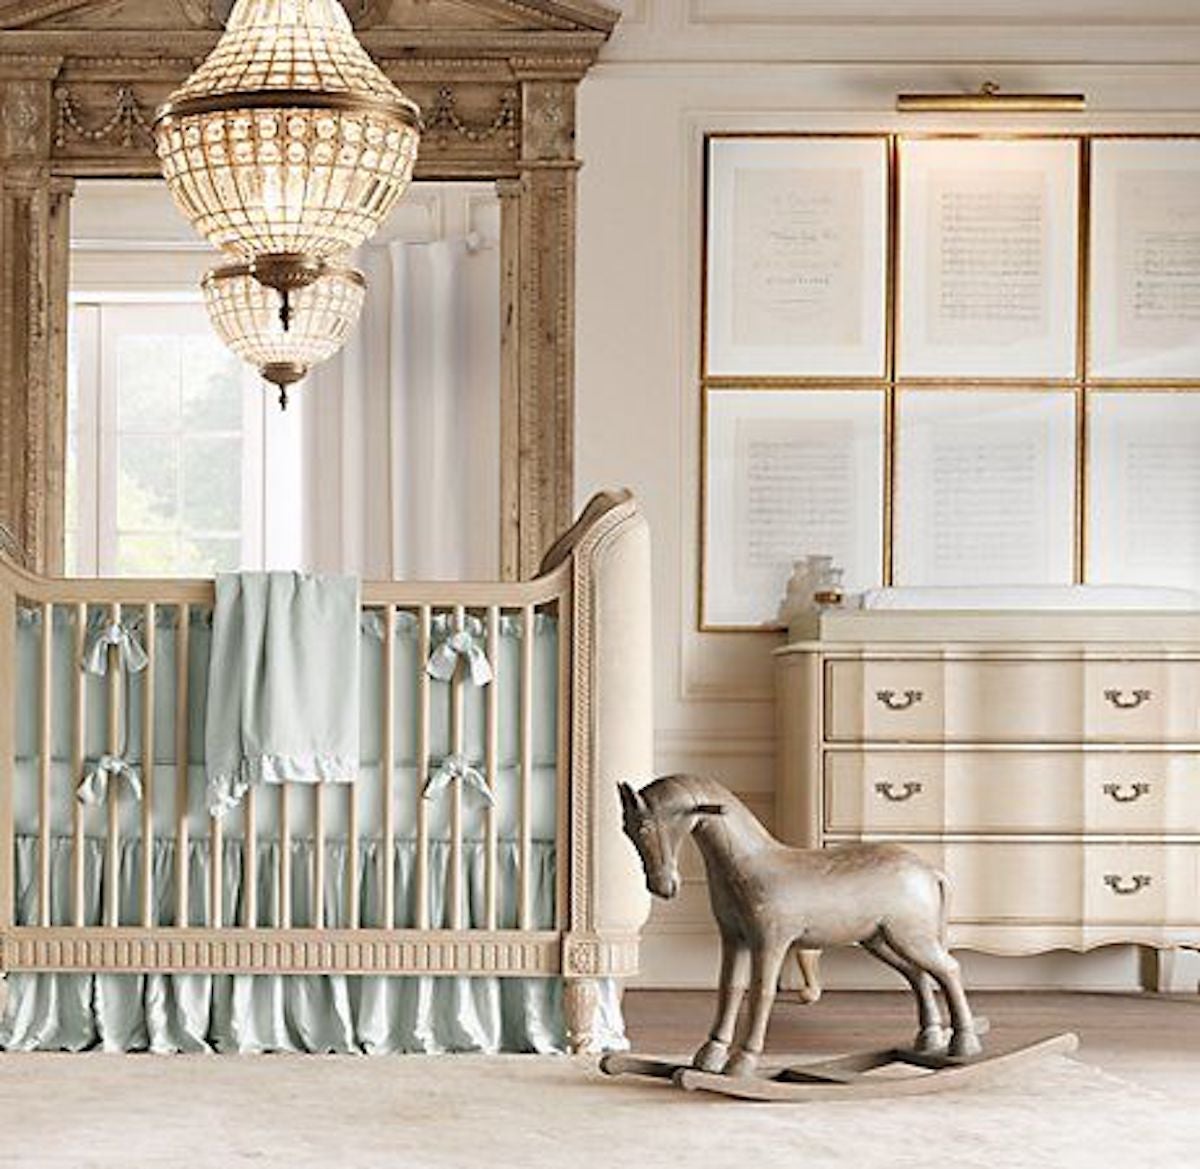 Gallery wall, crib, and rocking horse in nursery room